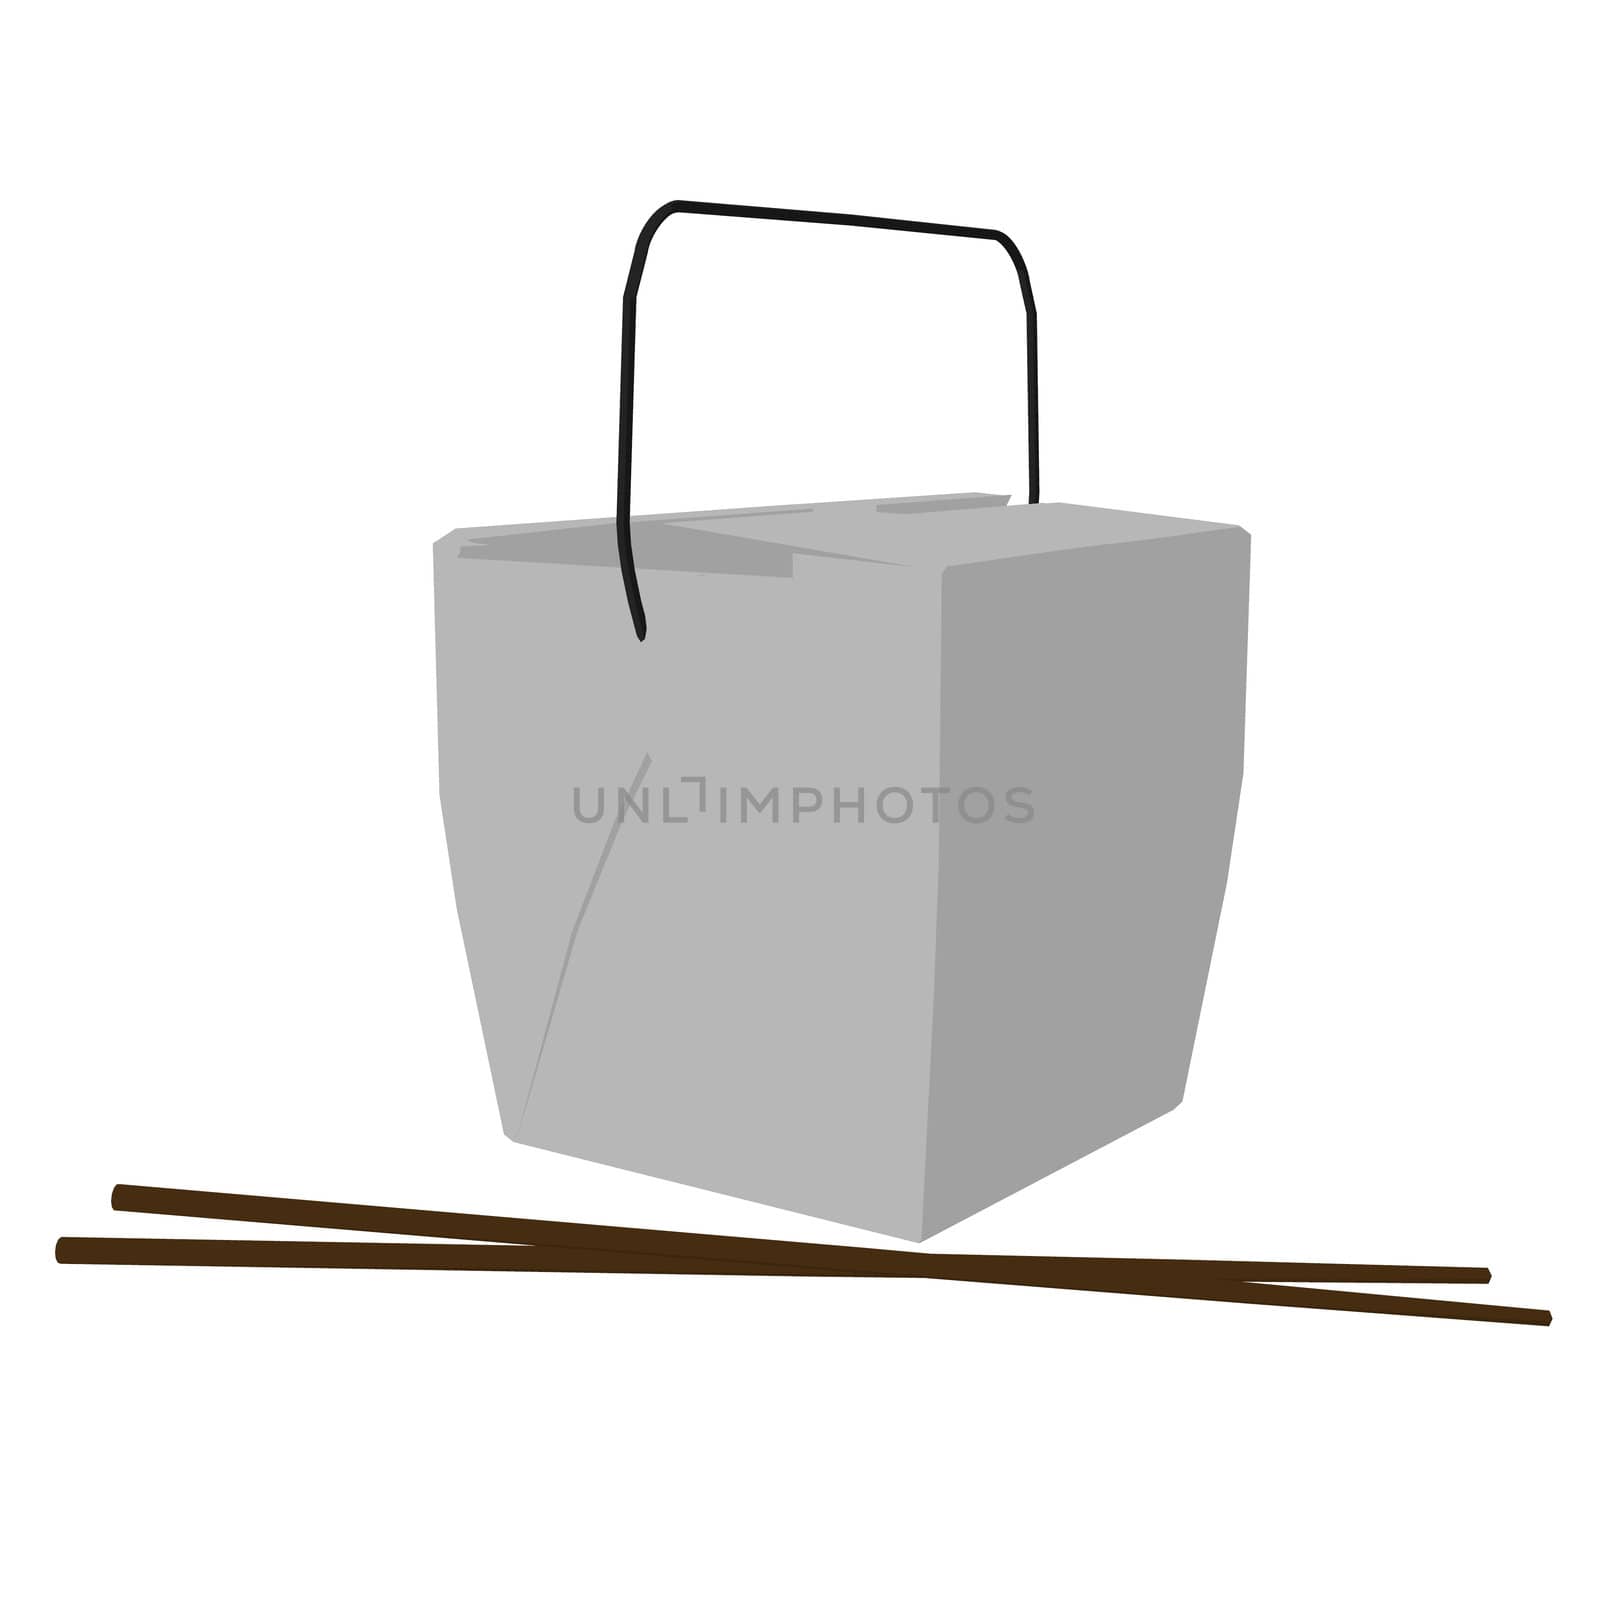 Takout Container and Chopsticks Illustration on a white background